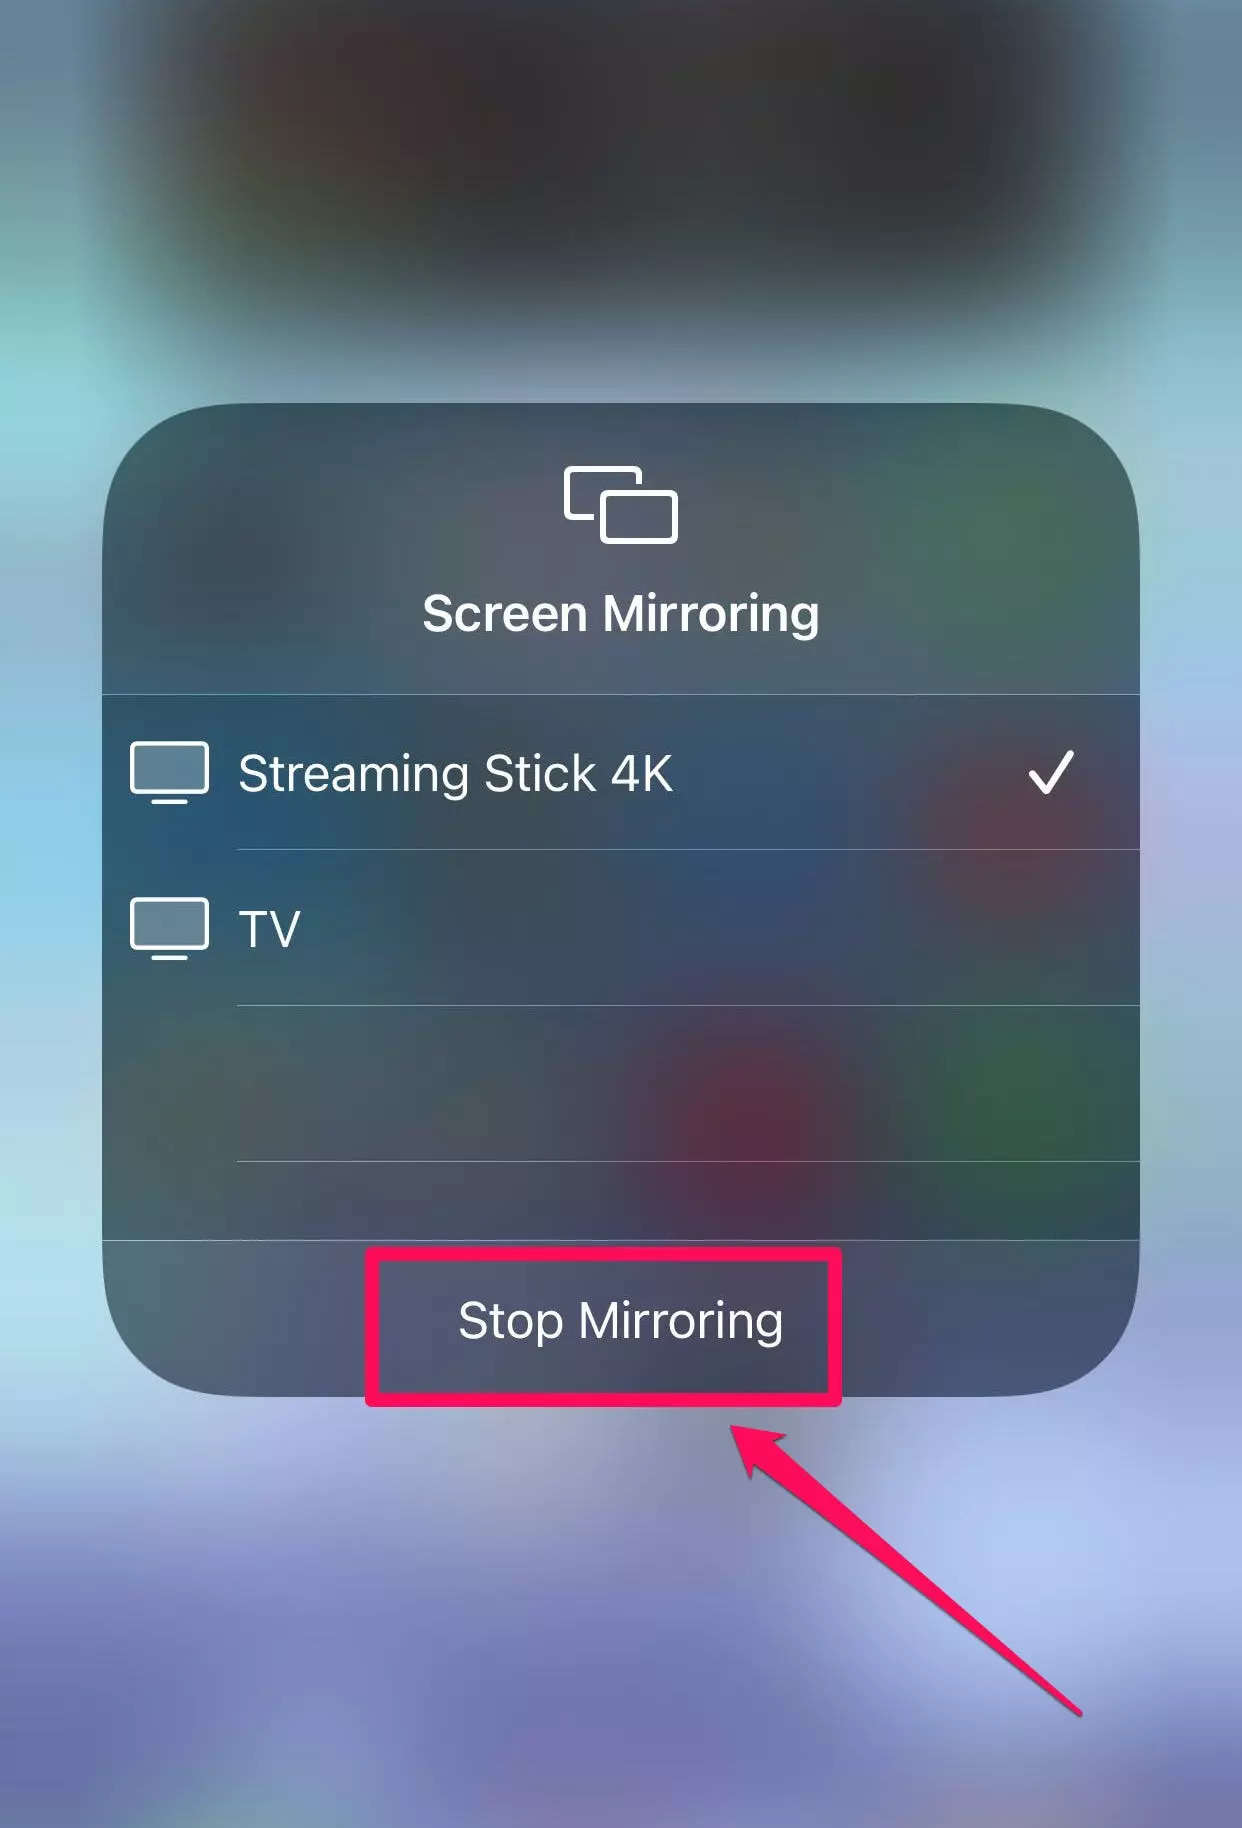 How To Turn Off Airplay Screen Sharing, How Do I Disable Screen Mirroring On My Ipad